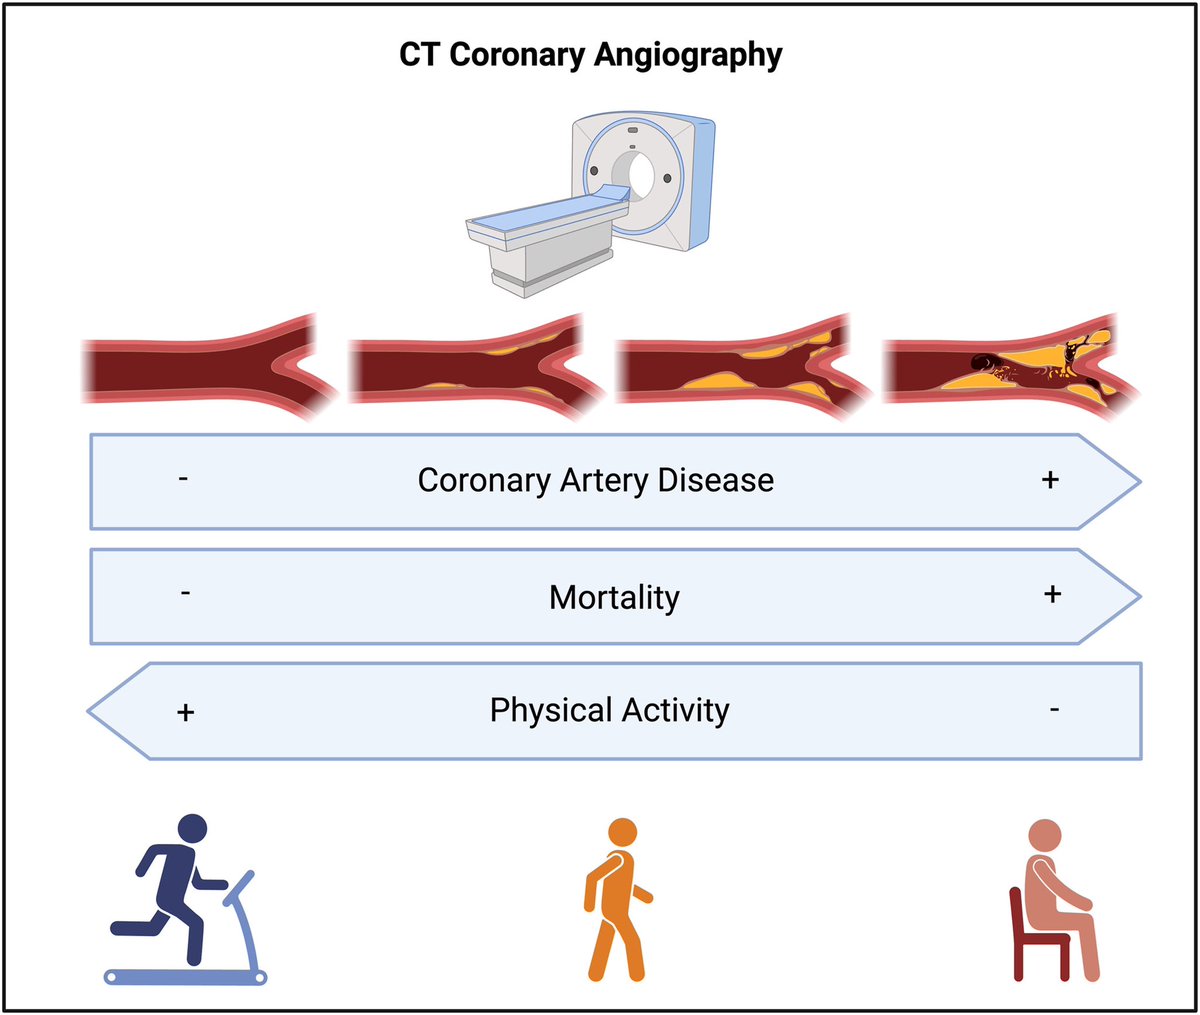 Check our editorial with Chip Lavie and @BudoffMd 👉🏻 Improving the prognostic impact of computed tomography coronary angiography with physical activity, exercise and fitness based on the great paper by @NatanzonSharon @robertjhmiller @Piotr_JSlomka @damini_dey @danielbermanmd…